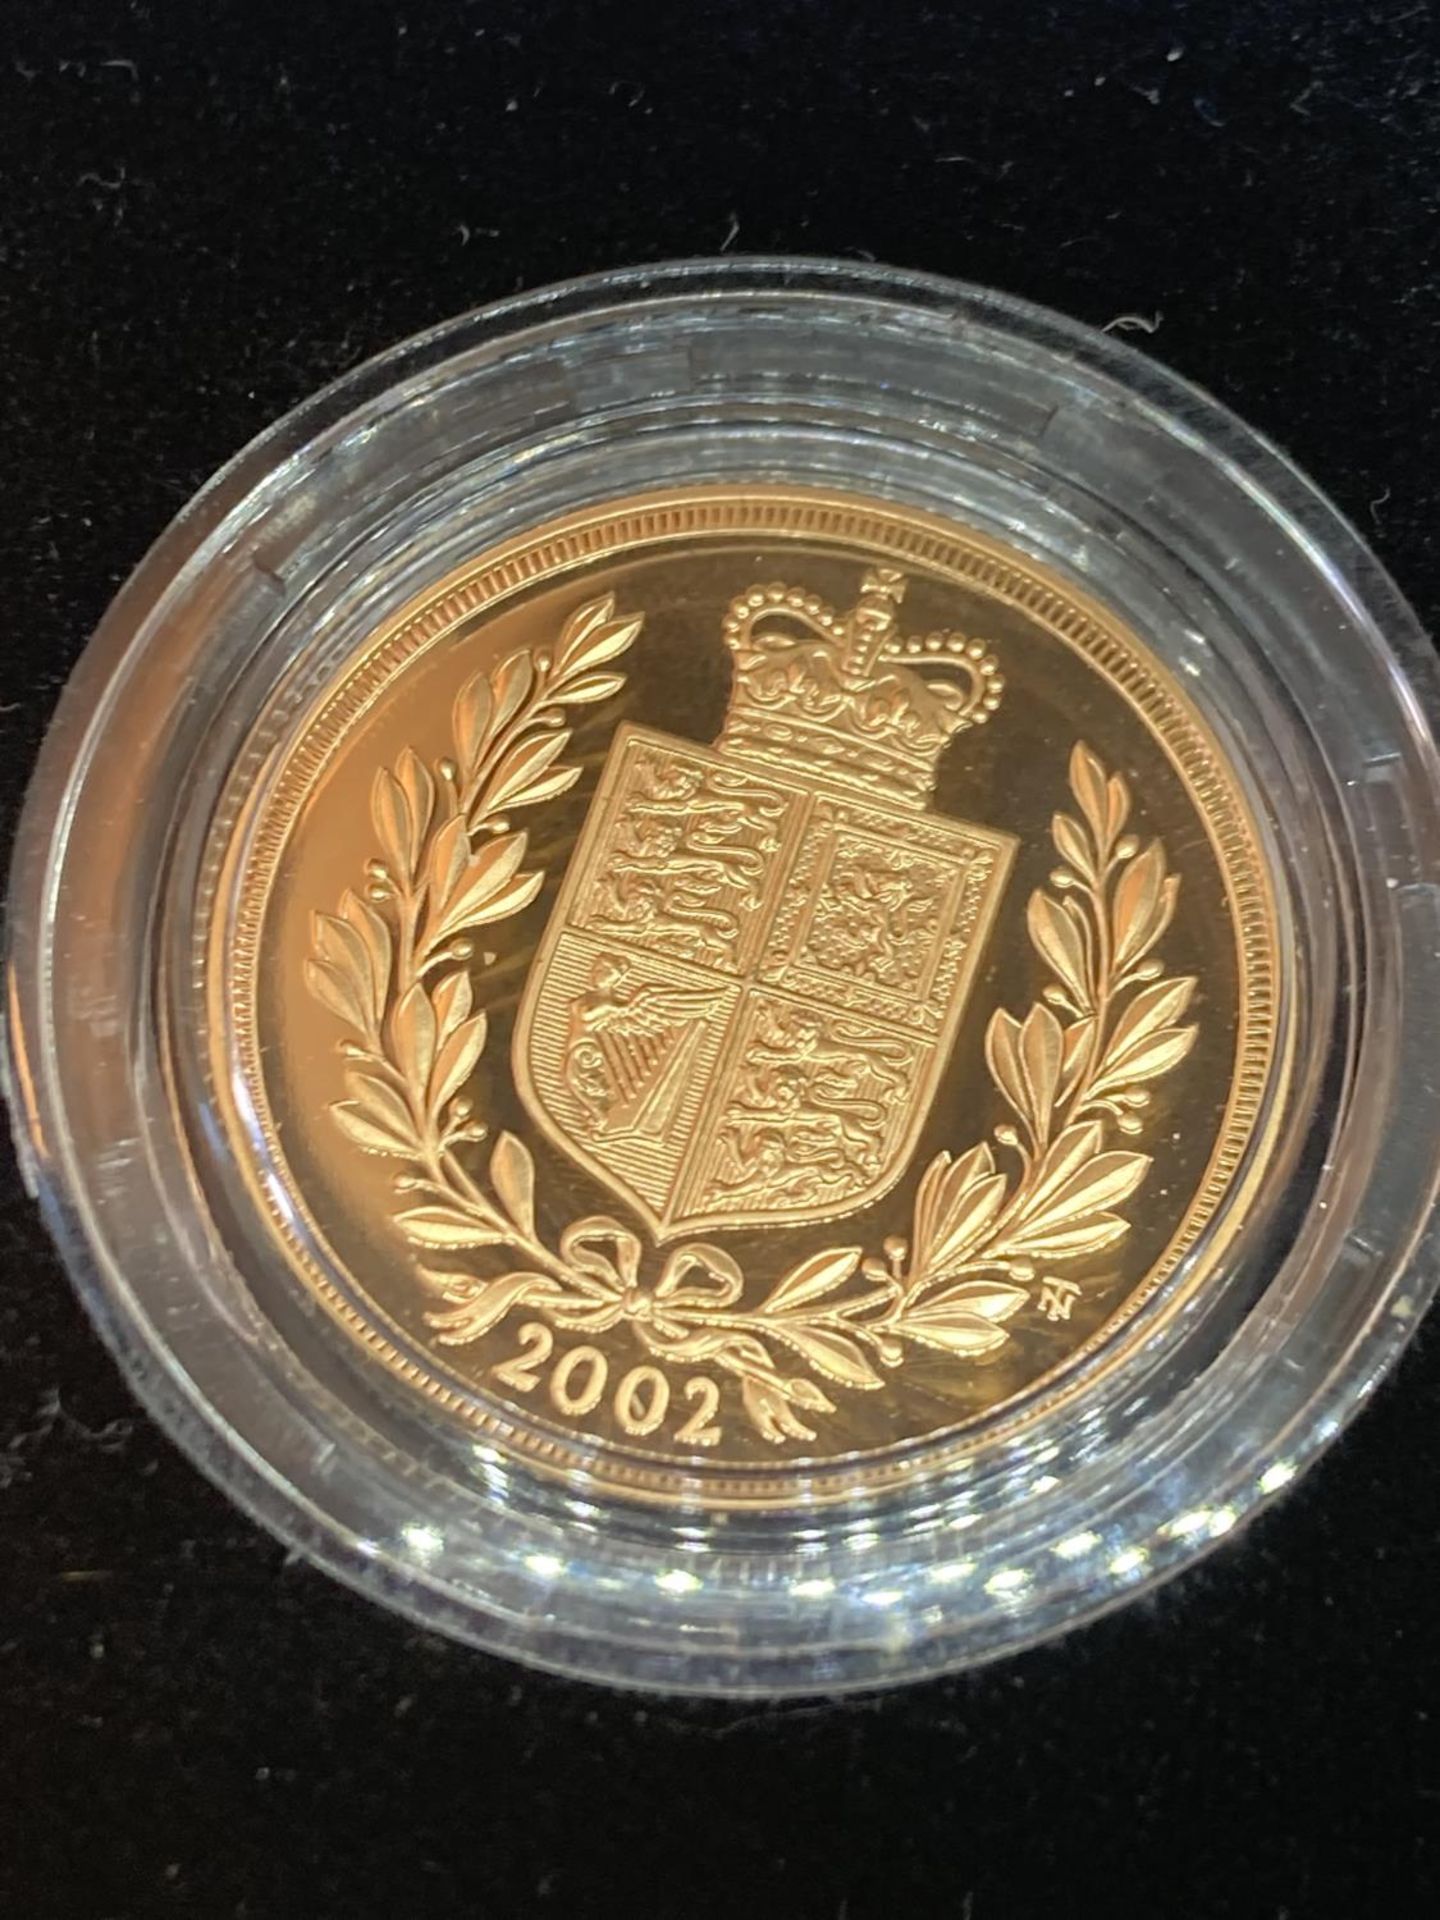 A 2002 ROYAL MINT GOLD PROOF FOUR COIN COLLECTION CELEBRATING QUEEN ELIZABETH II GOLDEN JUBILEE TO - Image 4 of 11